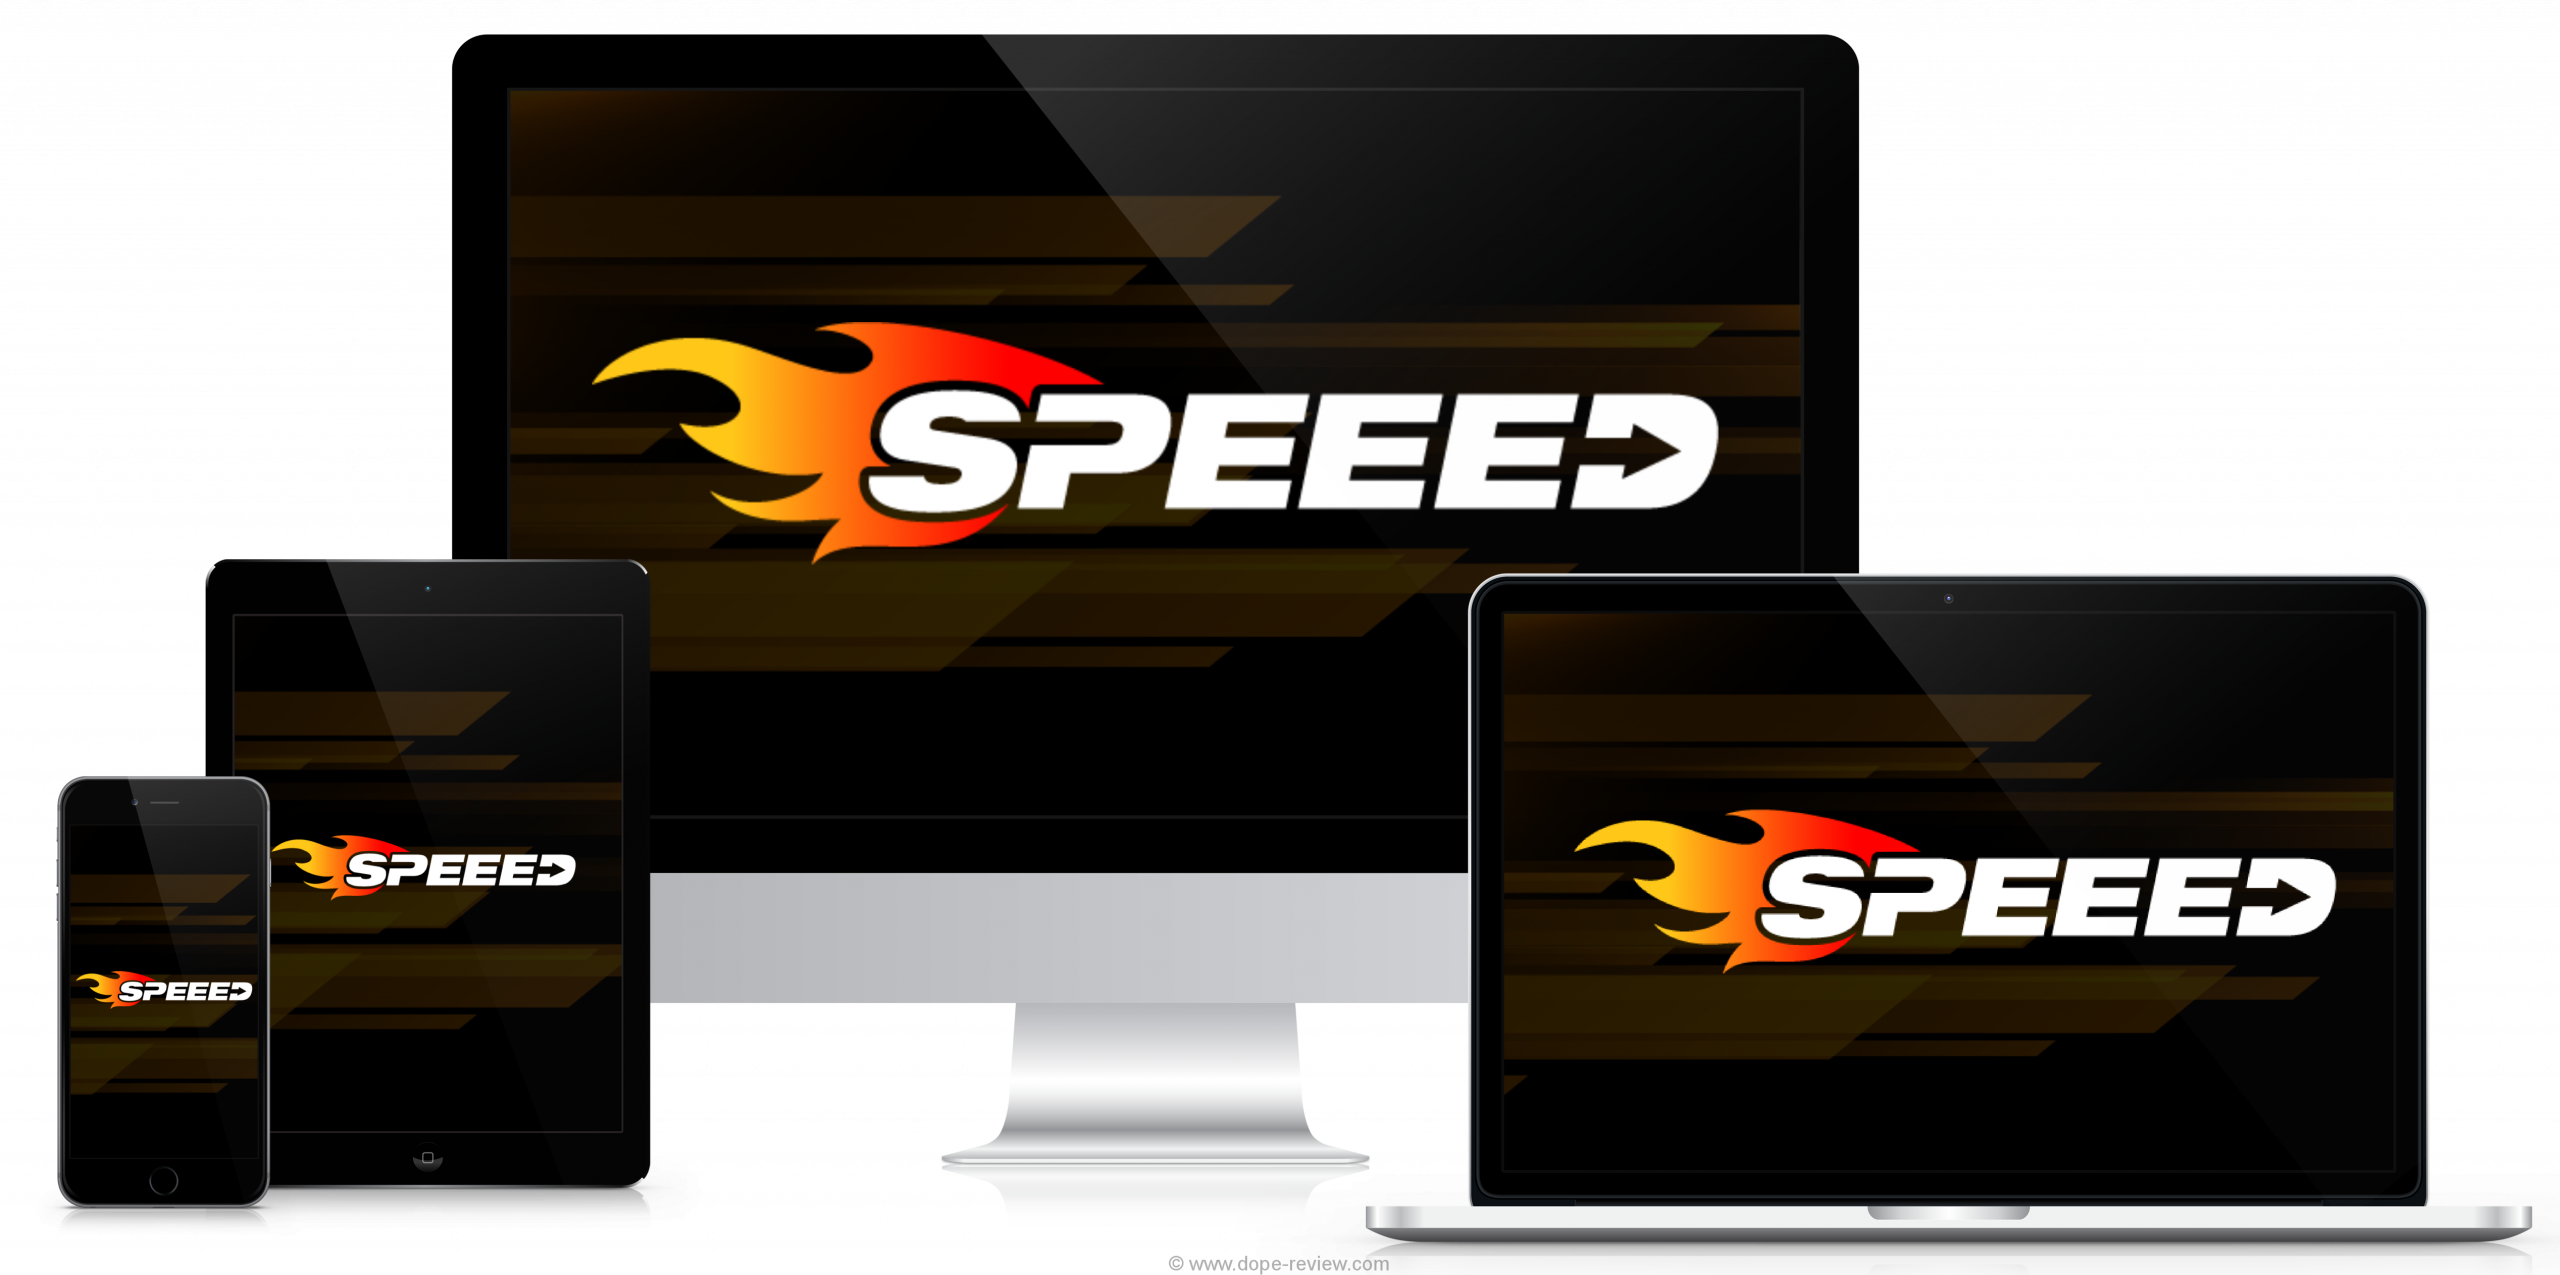 SpeeeD Review